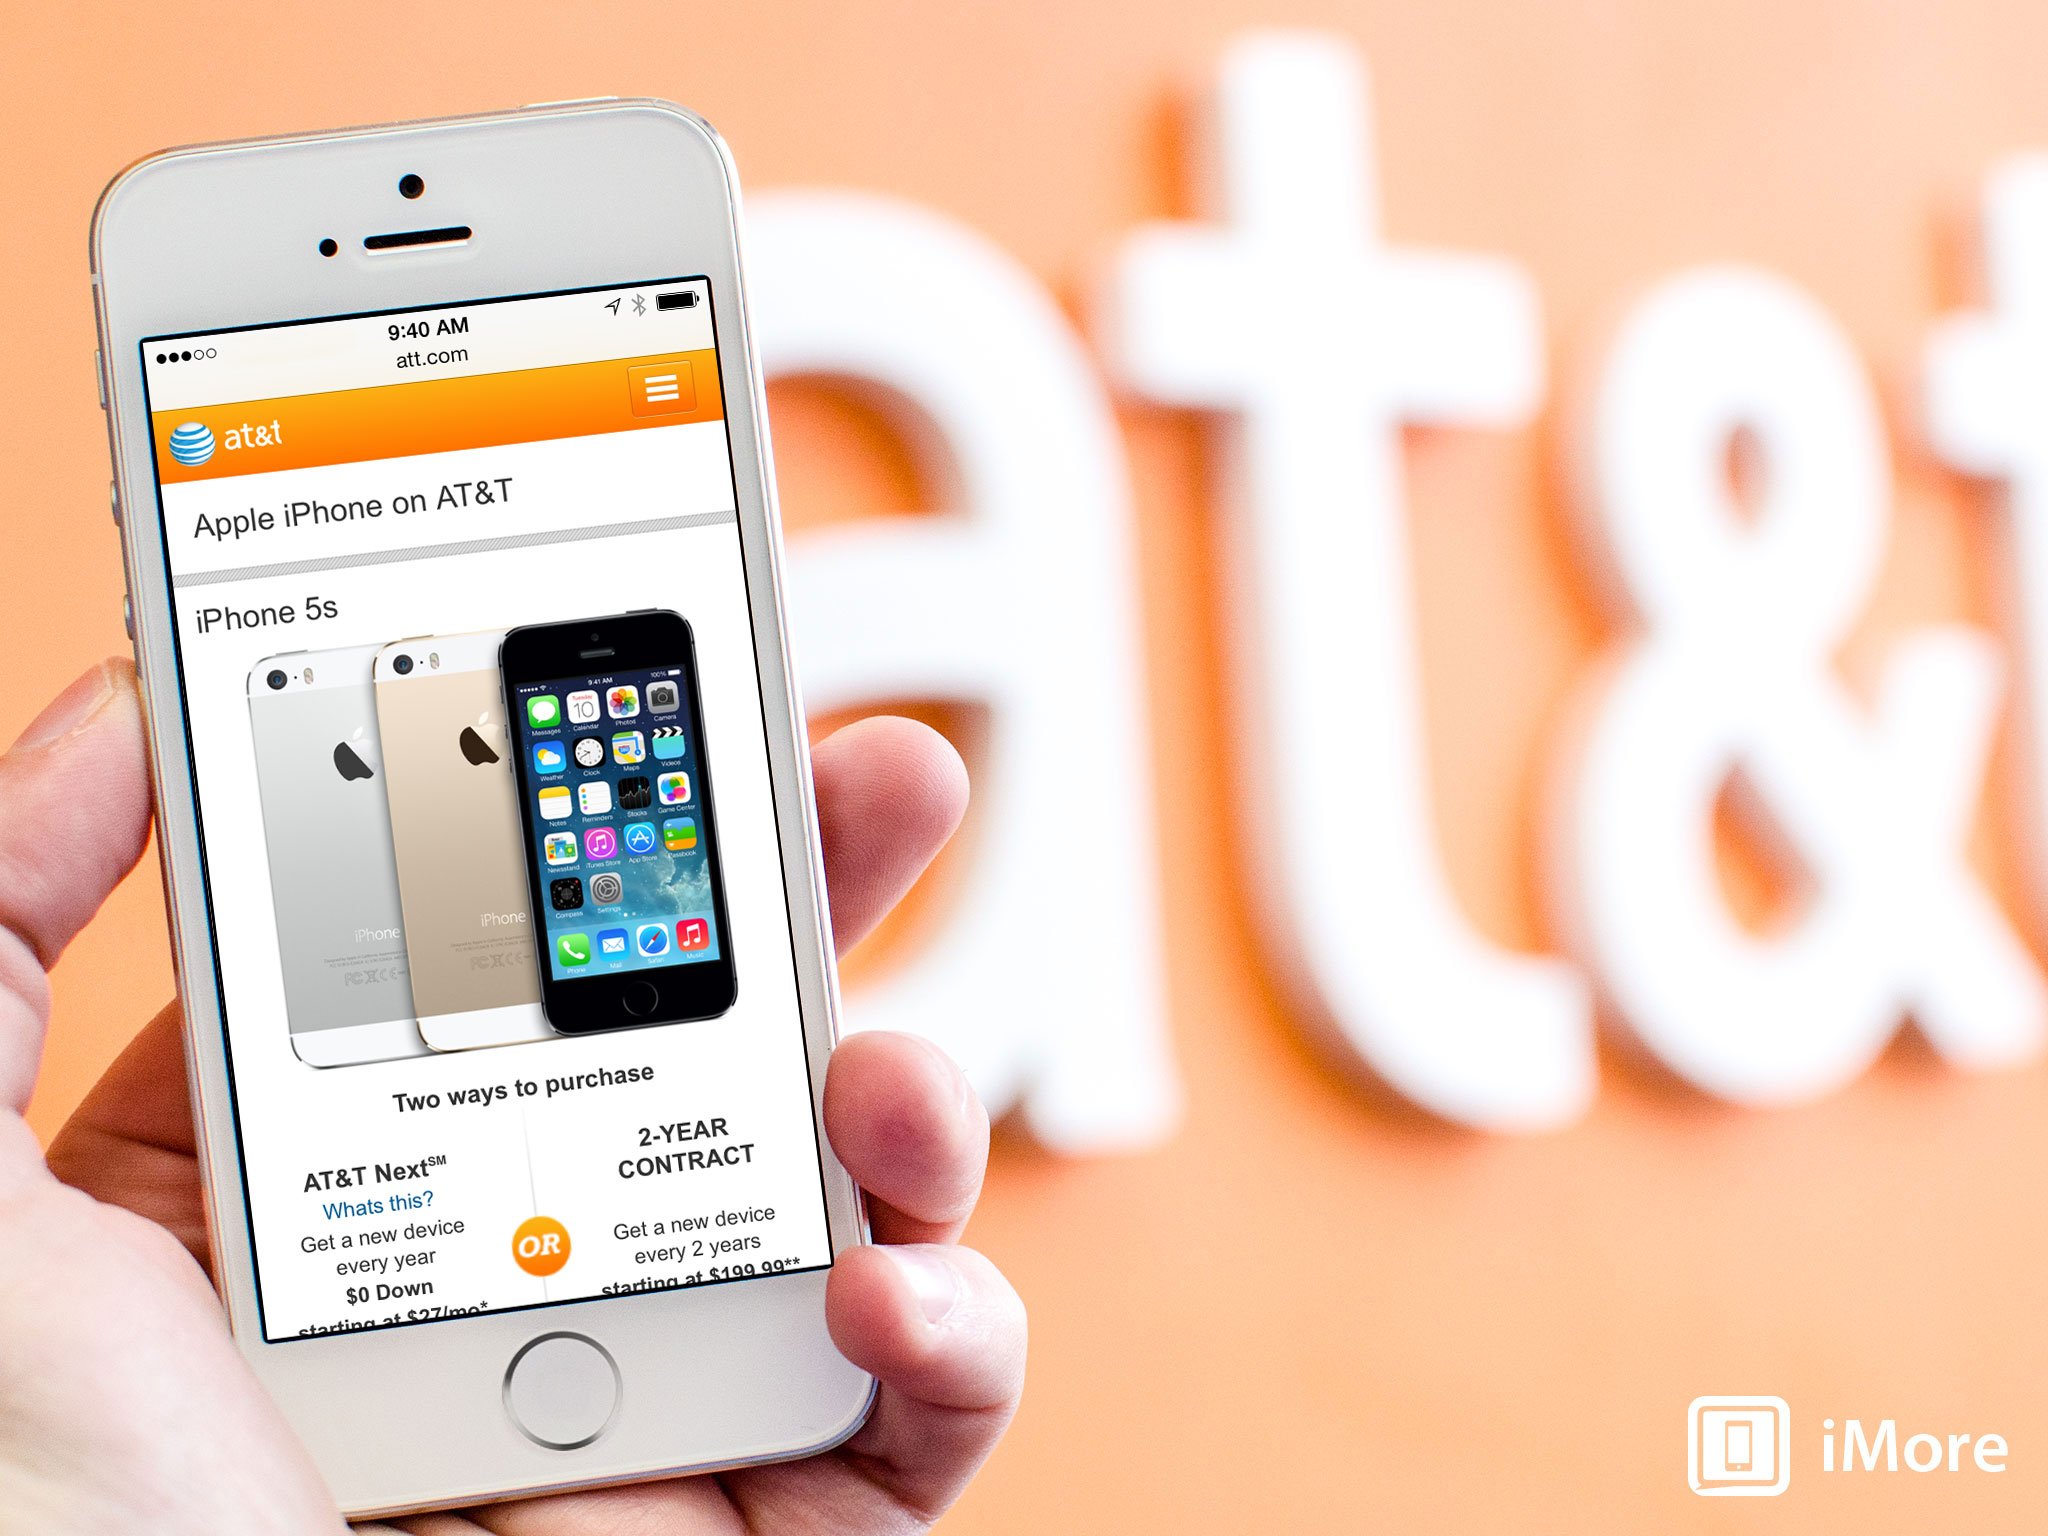 AT&T online offering $100 off 16GB iPhone 5s